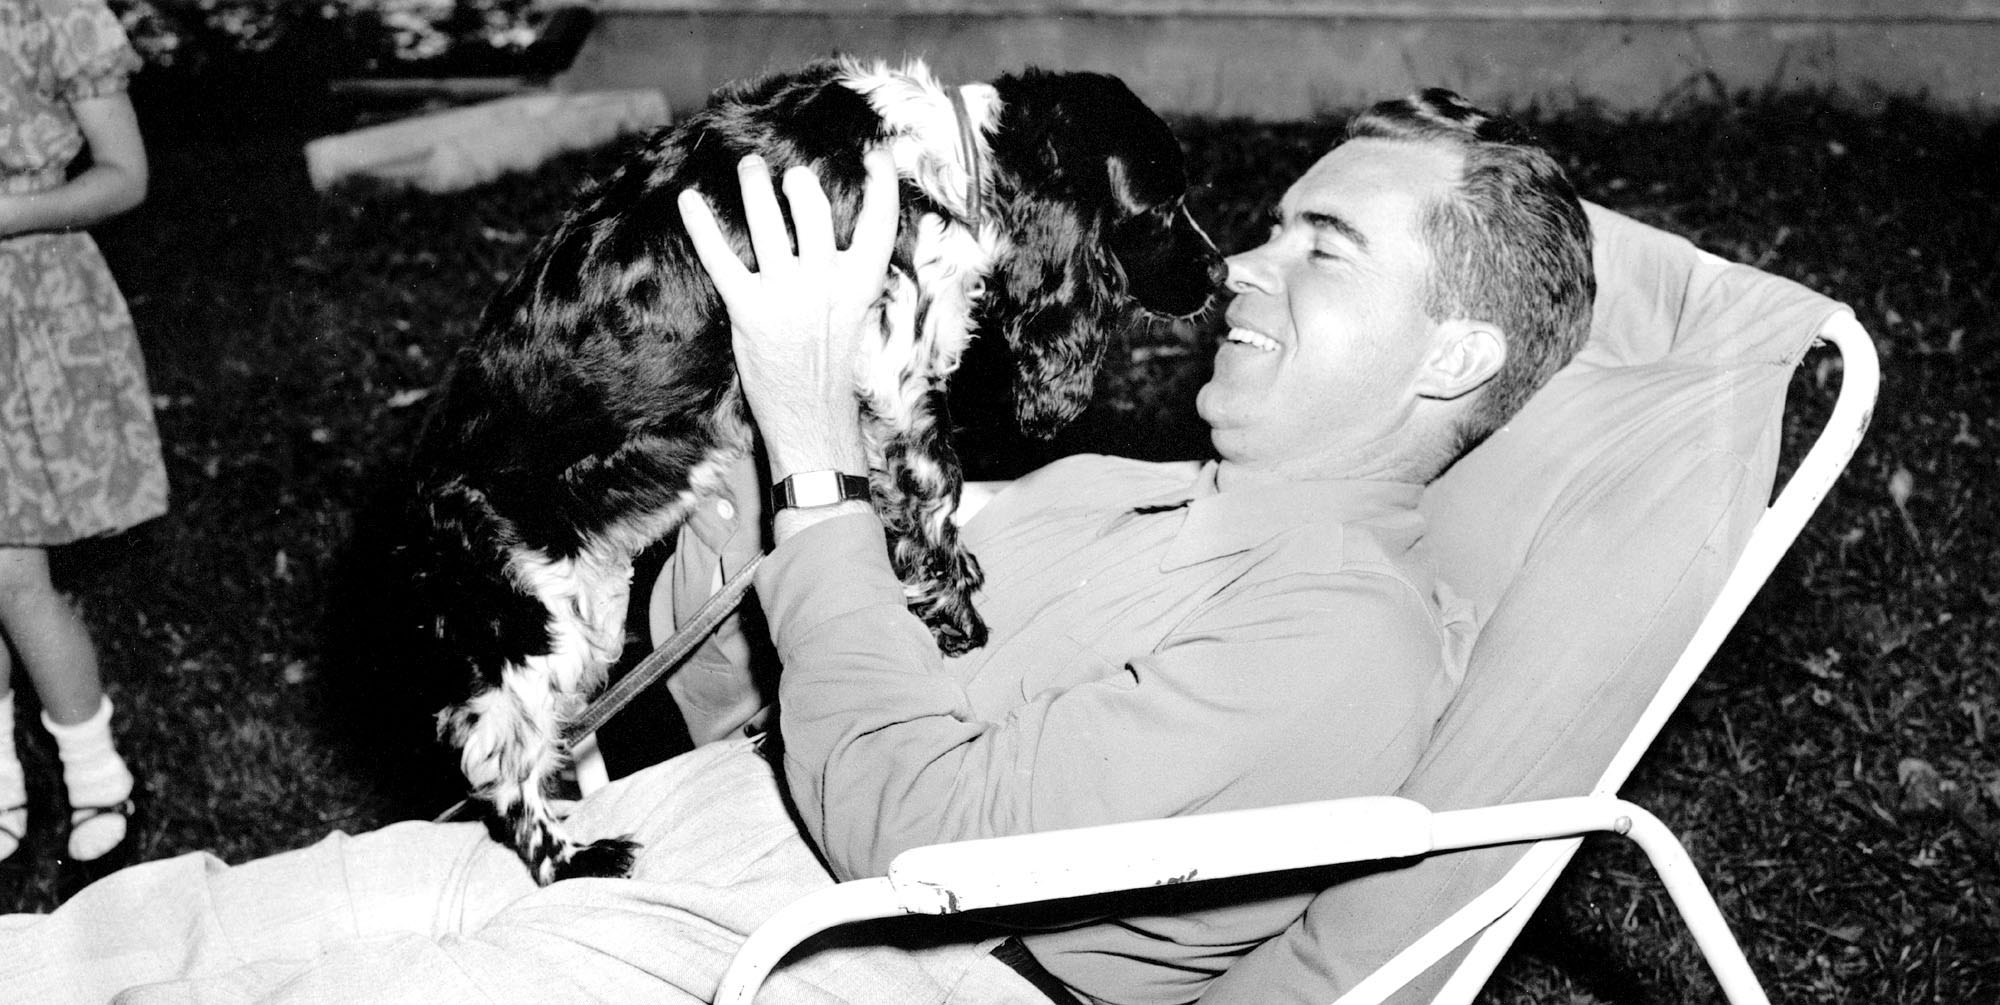 Richard M. Nixon plays with his family's black and white cocker spaniel "Checkers" at his home in Washington on Sept. 28, 1952.